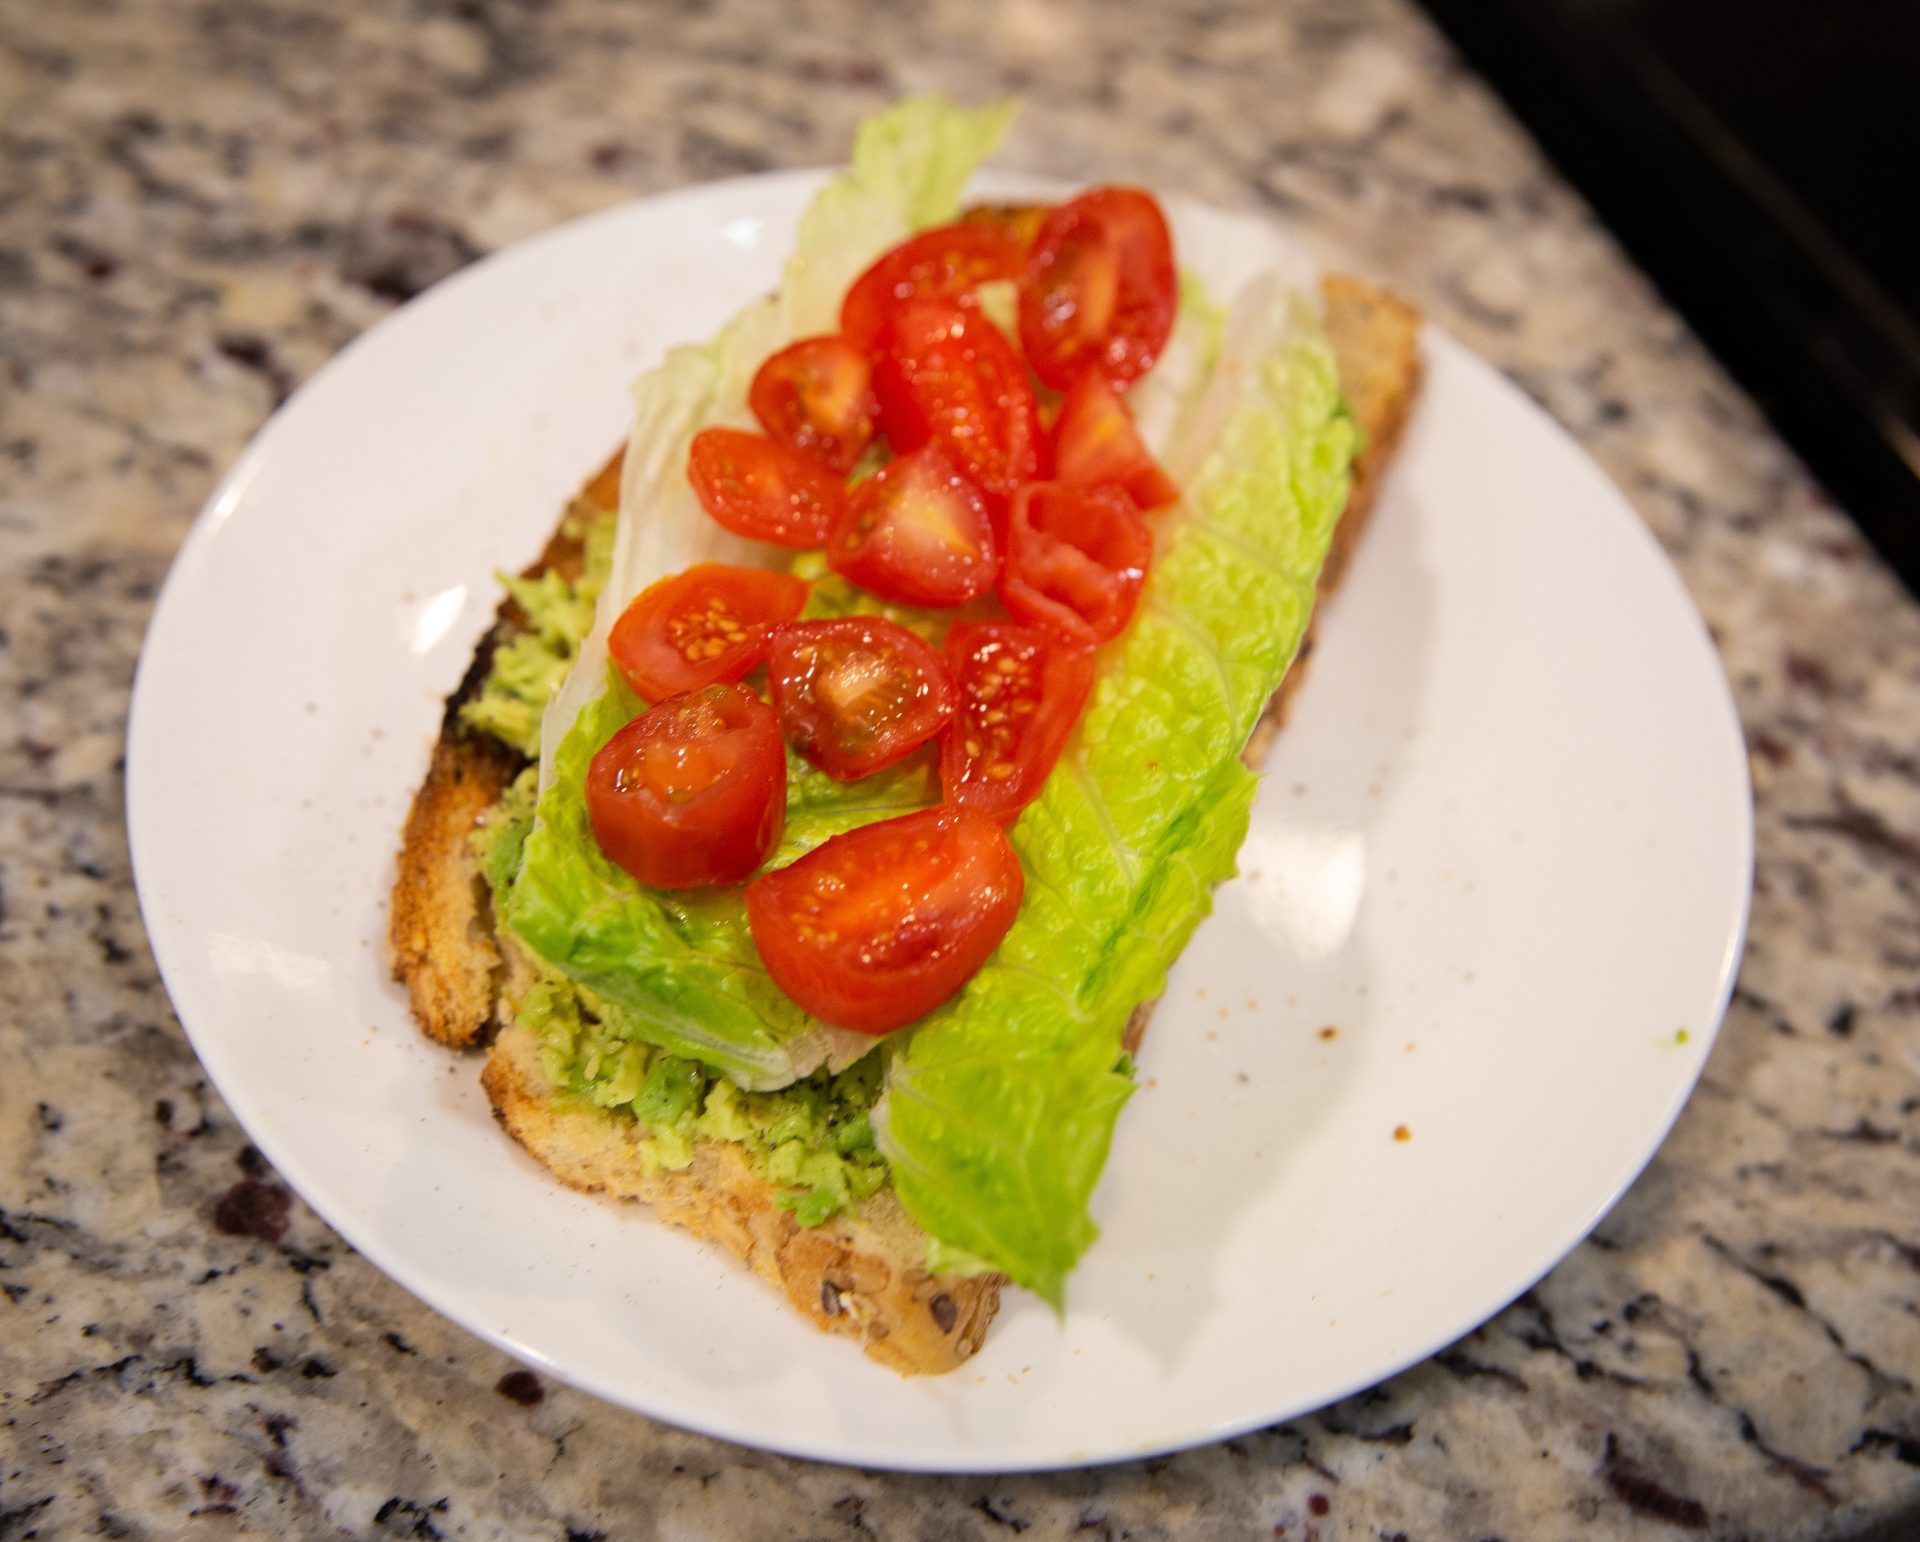 Toast topped with avocado, lettuce and tomatoes.